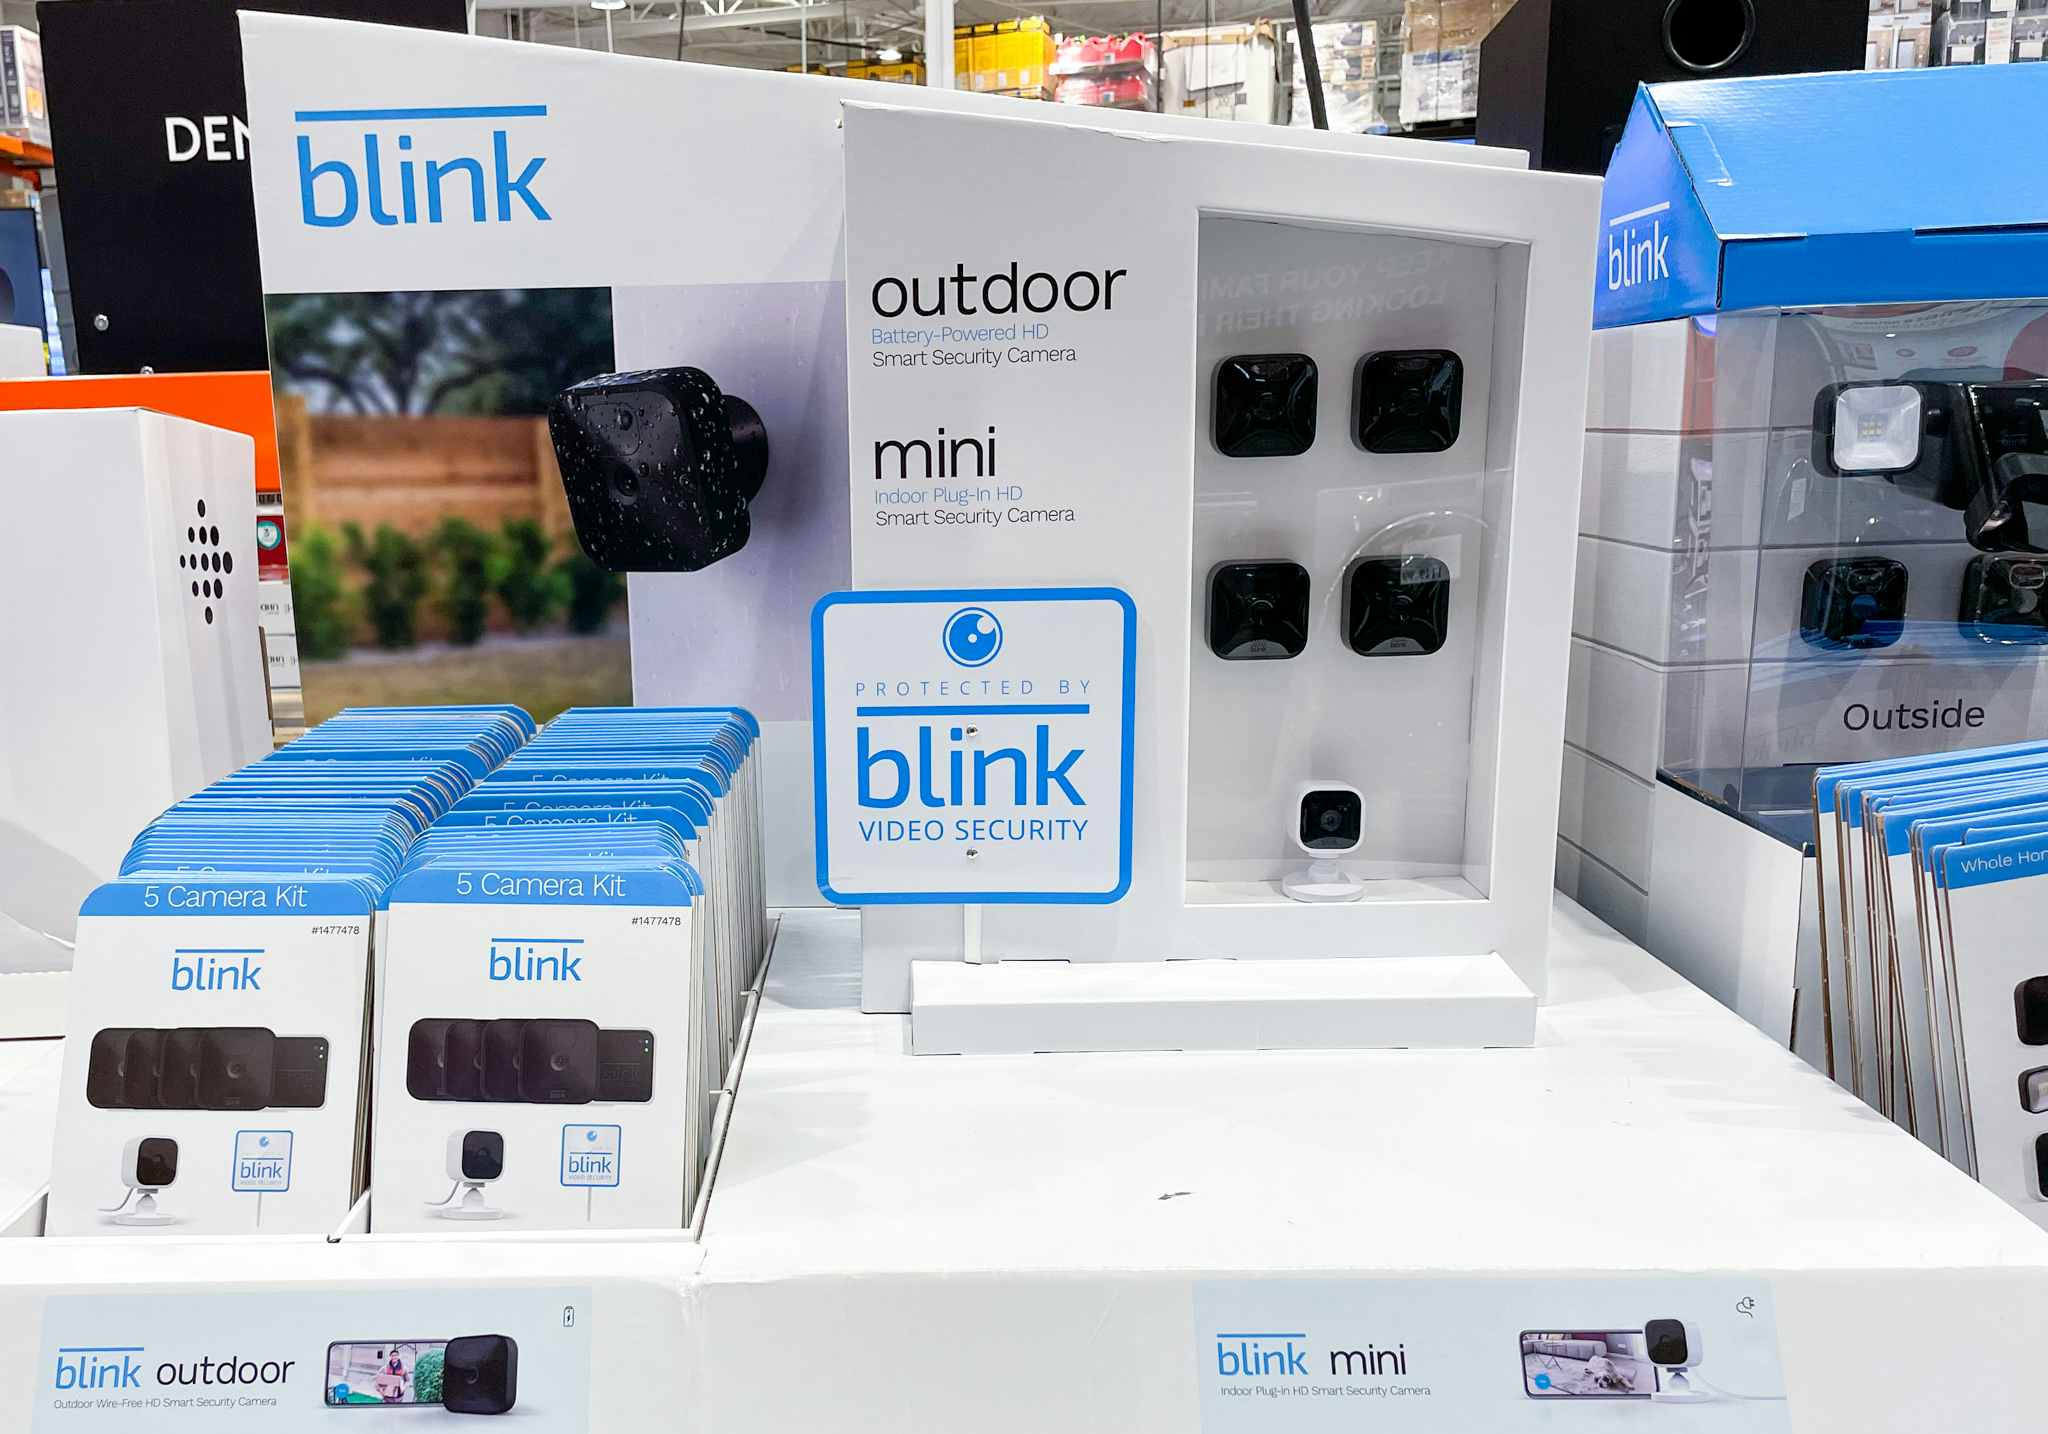 display of a Blink five camera security system at Costco